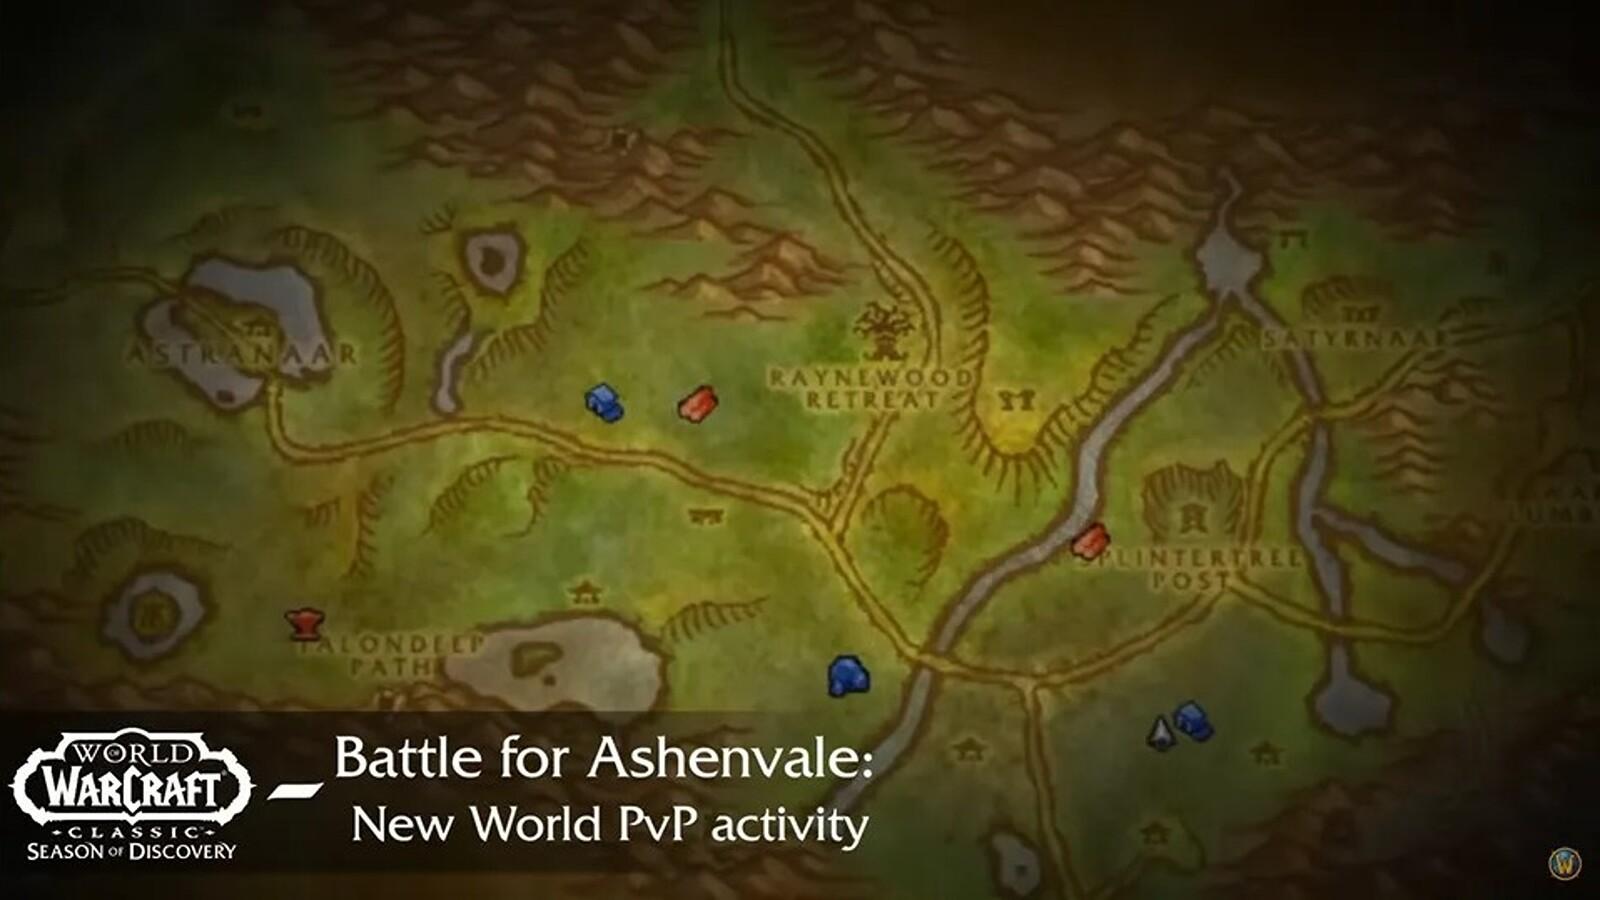 The Battle for Ashenvale PvP map